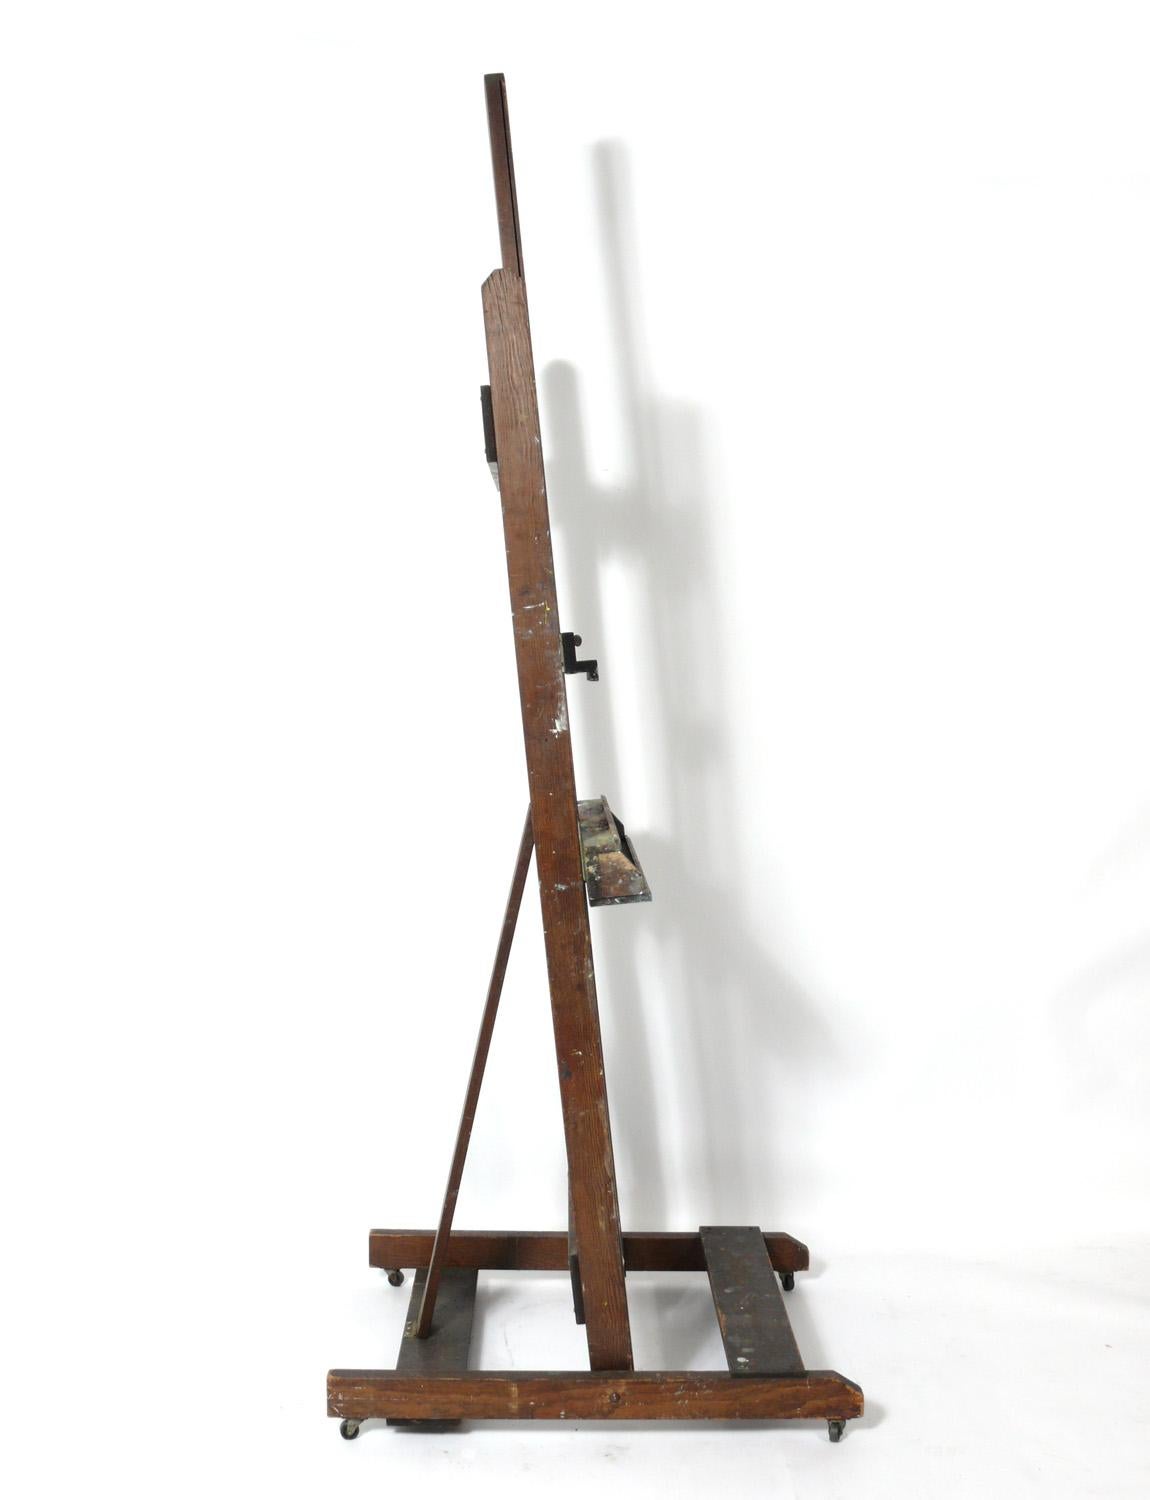 Vintage artist's easel by Anco Bilt, American, circa 1950s. This easel is a versatile piece and can be used for its intended purpose, as an easel, or to display a work of art, or hold a flat screen television. The easel retains its wonderful